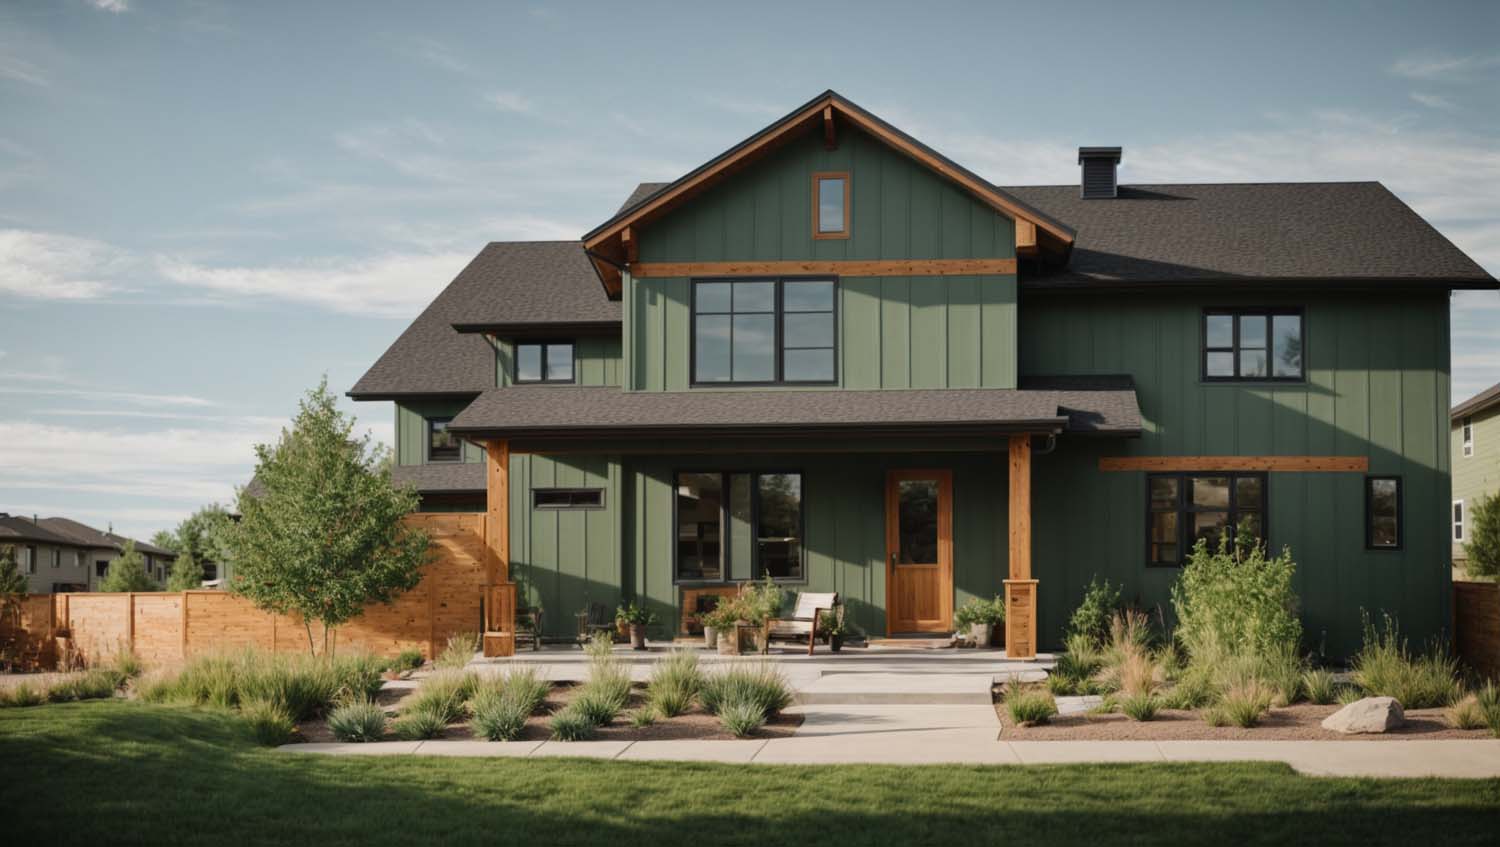 Castle Rock's lap plank siding suppliers uphold honesty and integrity.